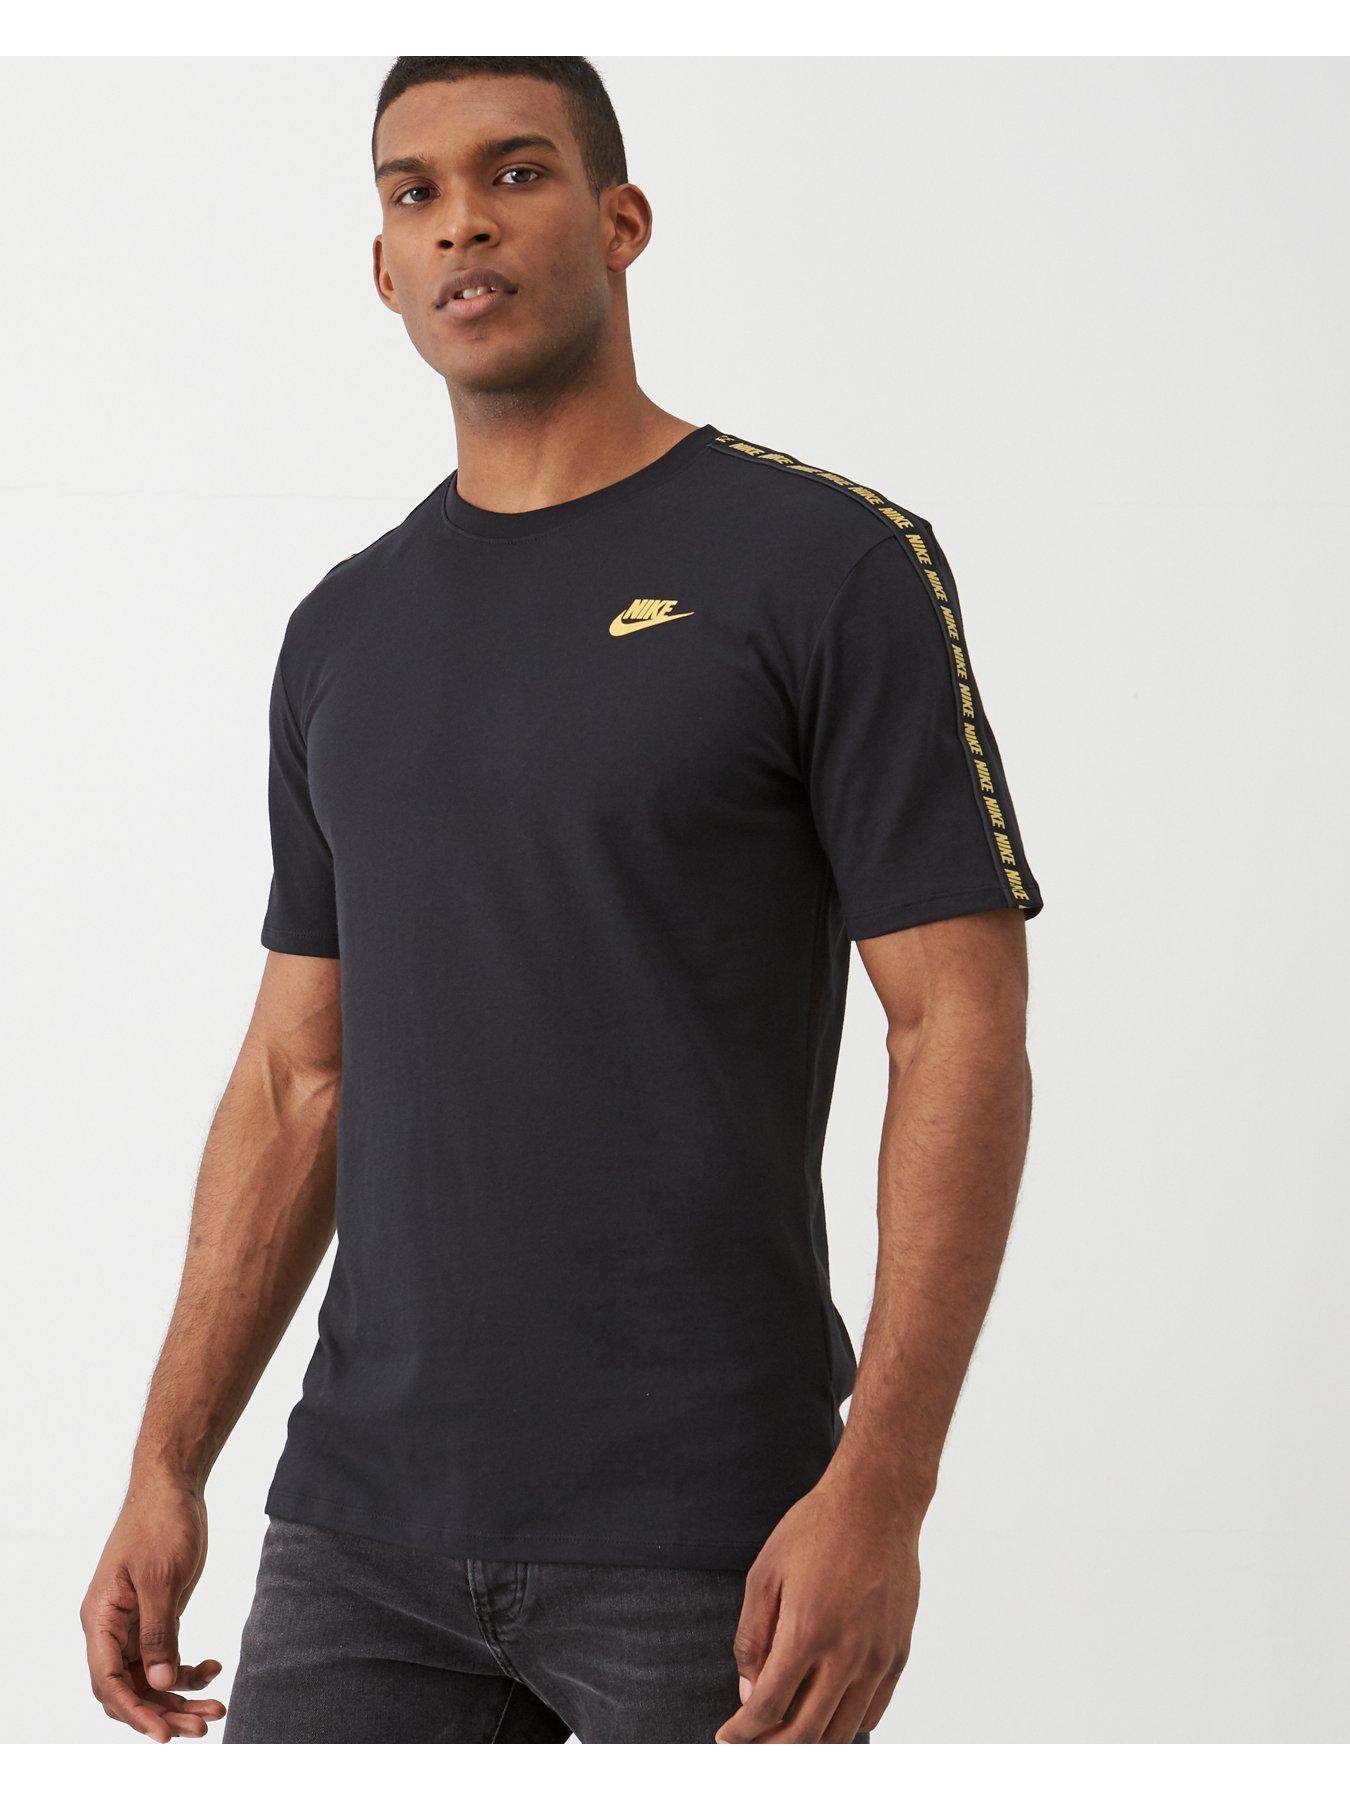 nike black and gold t shirt